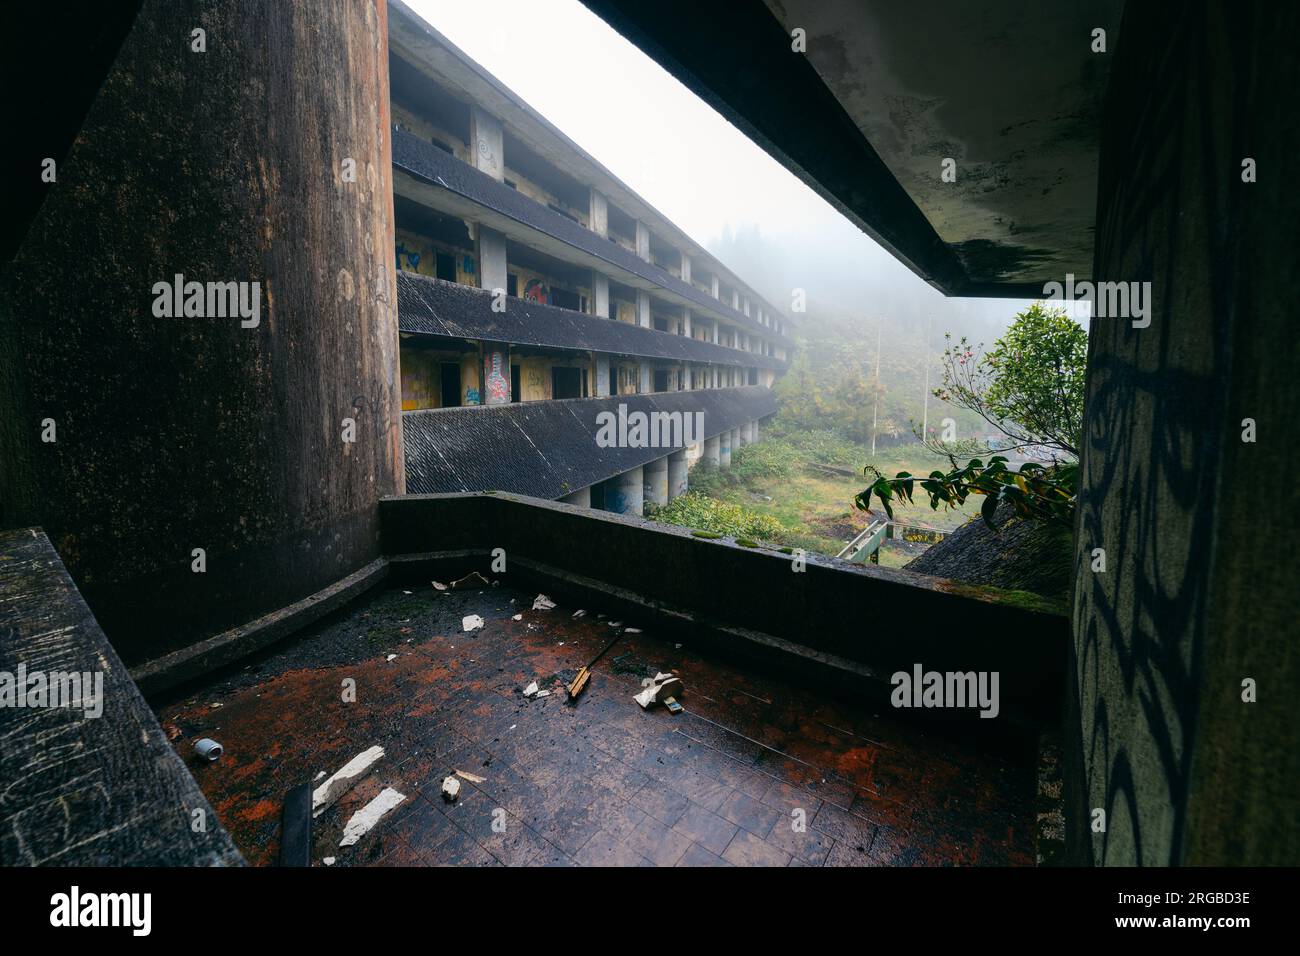 The history behind the world's abandoned hotels